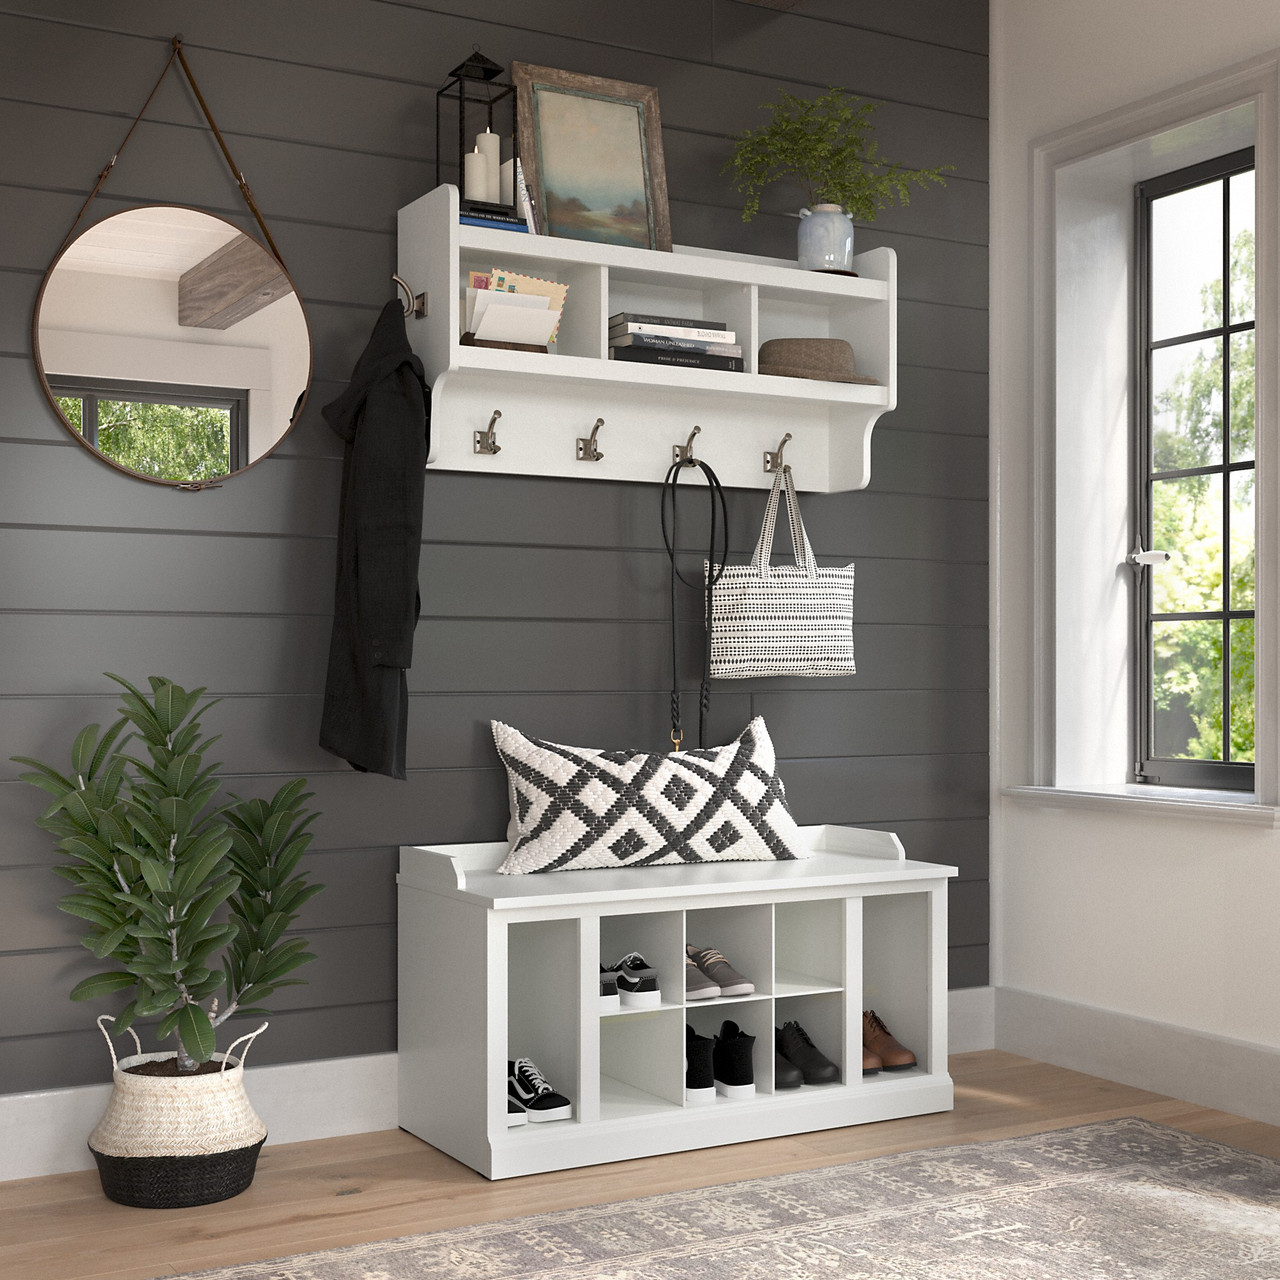 Kathy Ireland® Home by Bush Furniture Woodland 40W Shoe Storage Bench with  Shelves and Wall Mounted Coat Rack in White Ash - WDL004WAS Free Shipping!